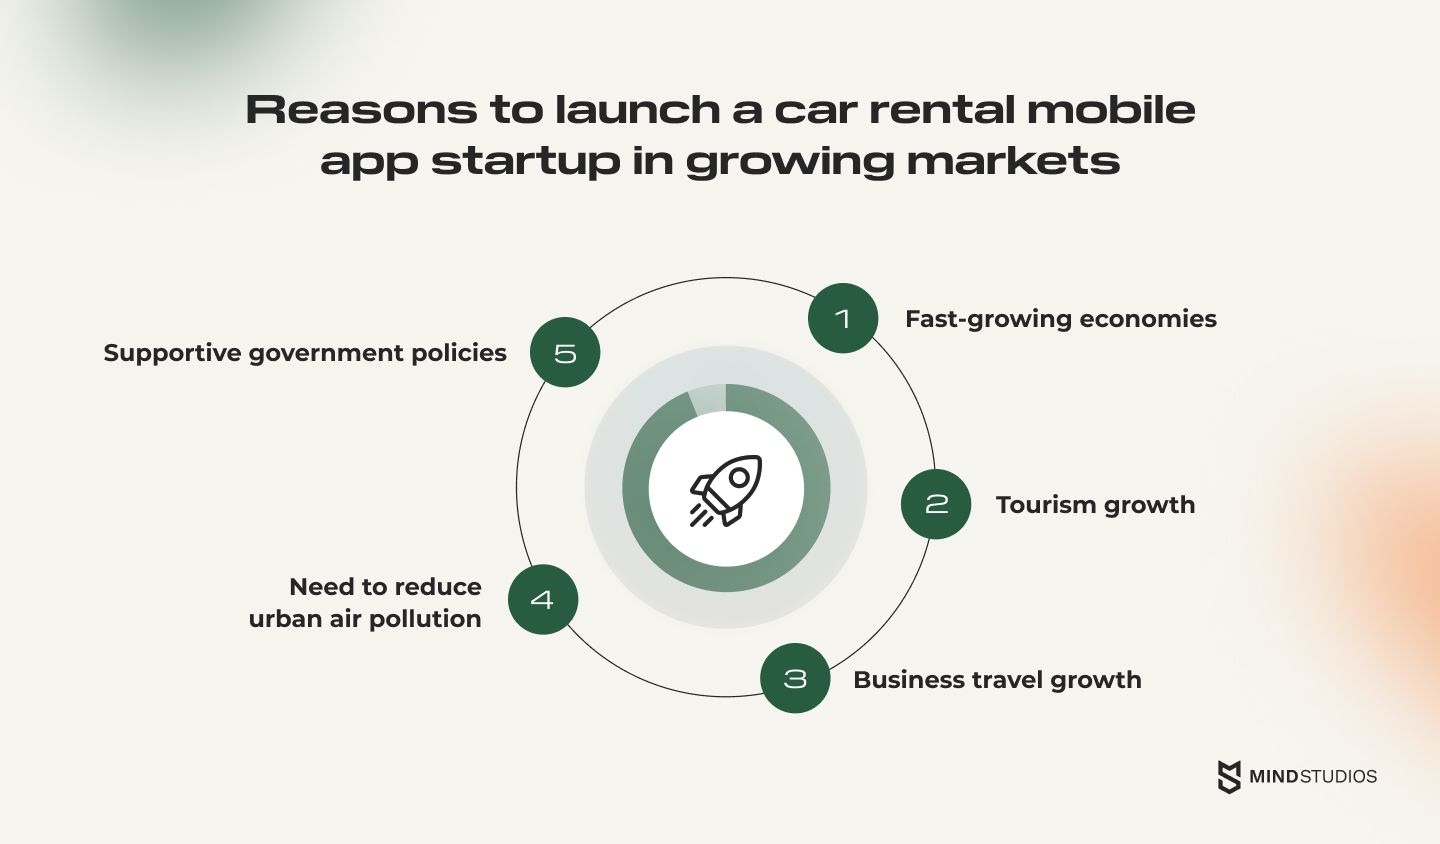 Reasons to launch a car rental app